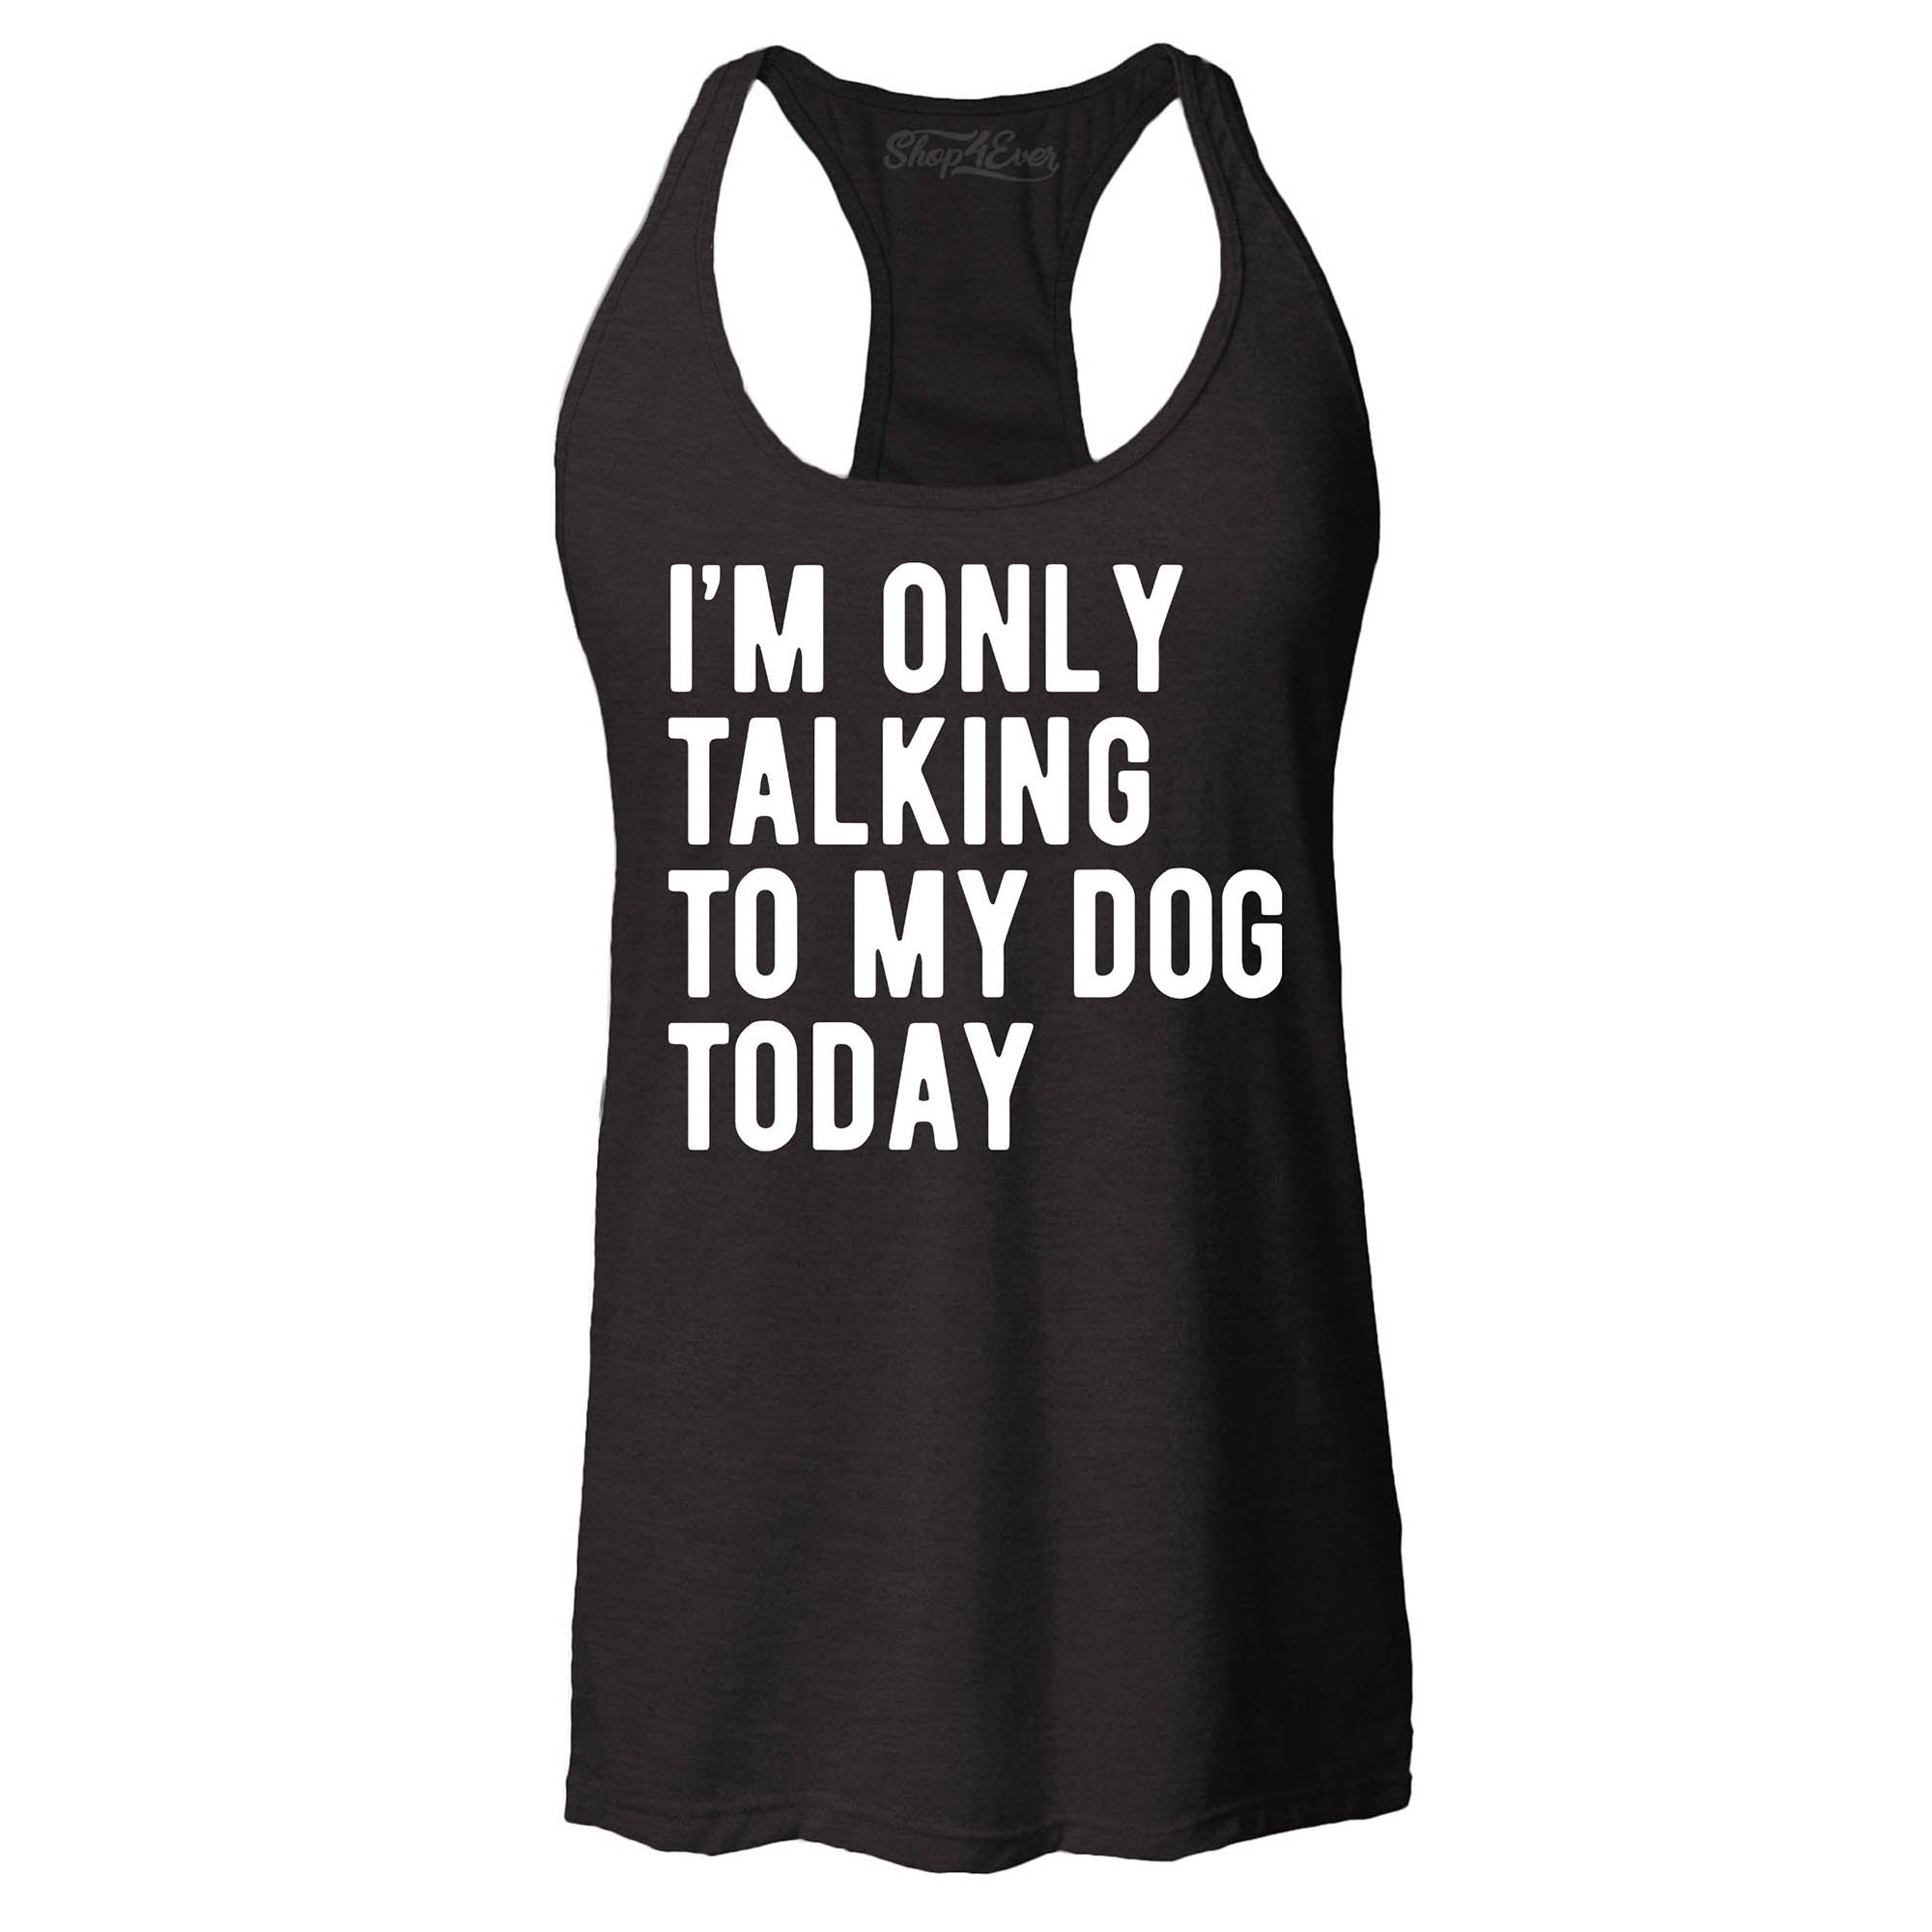 I'm Only Talking to My Dog Today Women's Racerback Tank Top Slim Fit